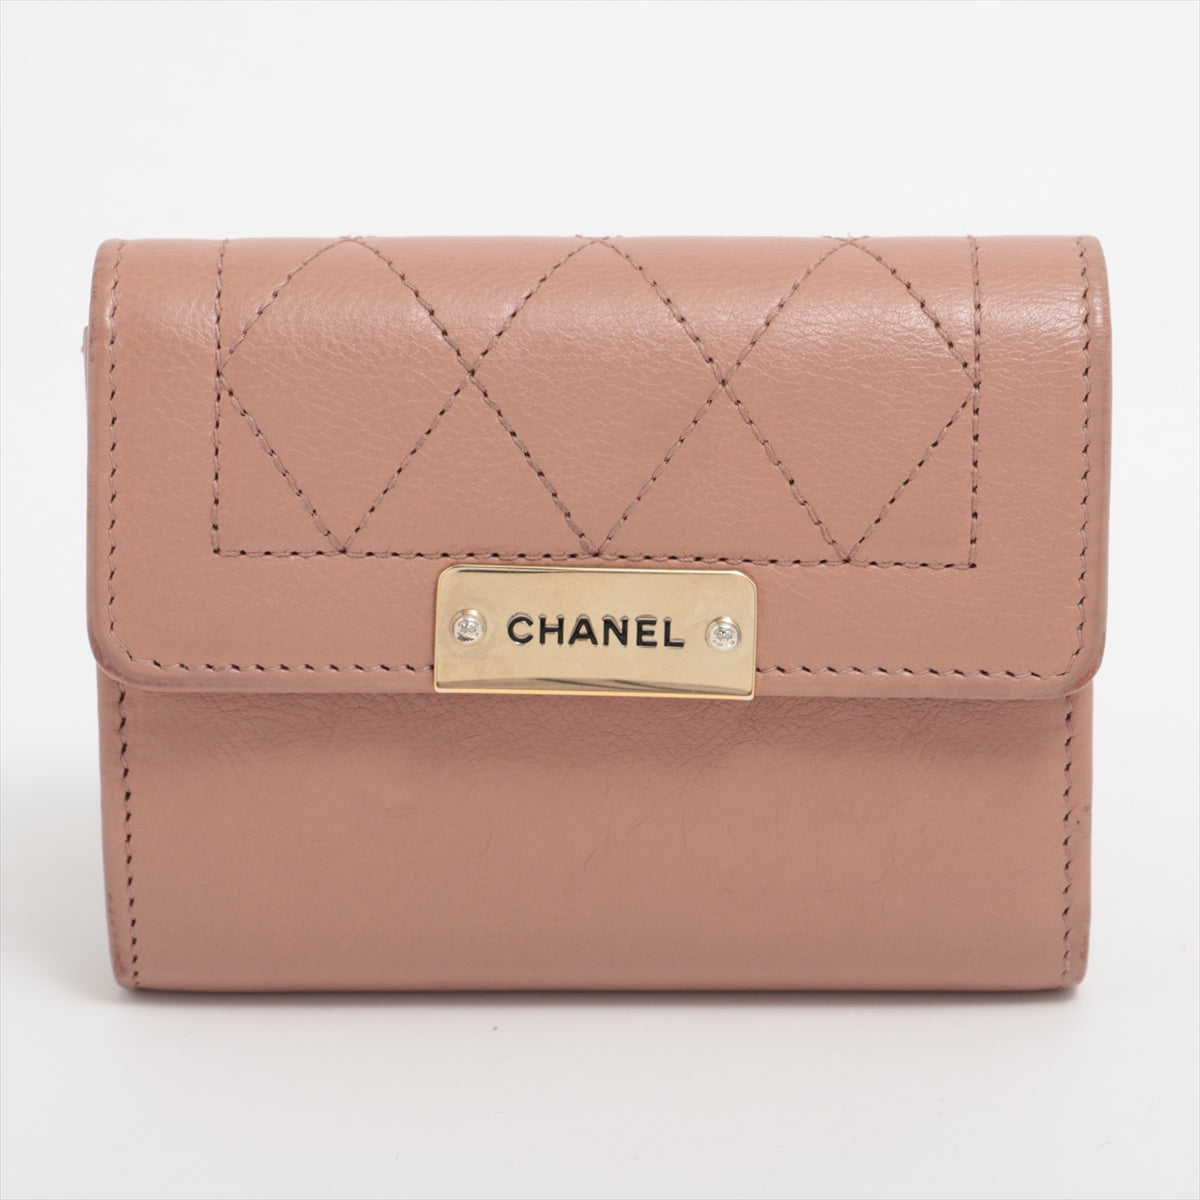 Chanel Logo Leather Coin Case Pink Beige G